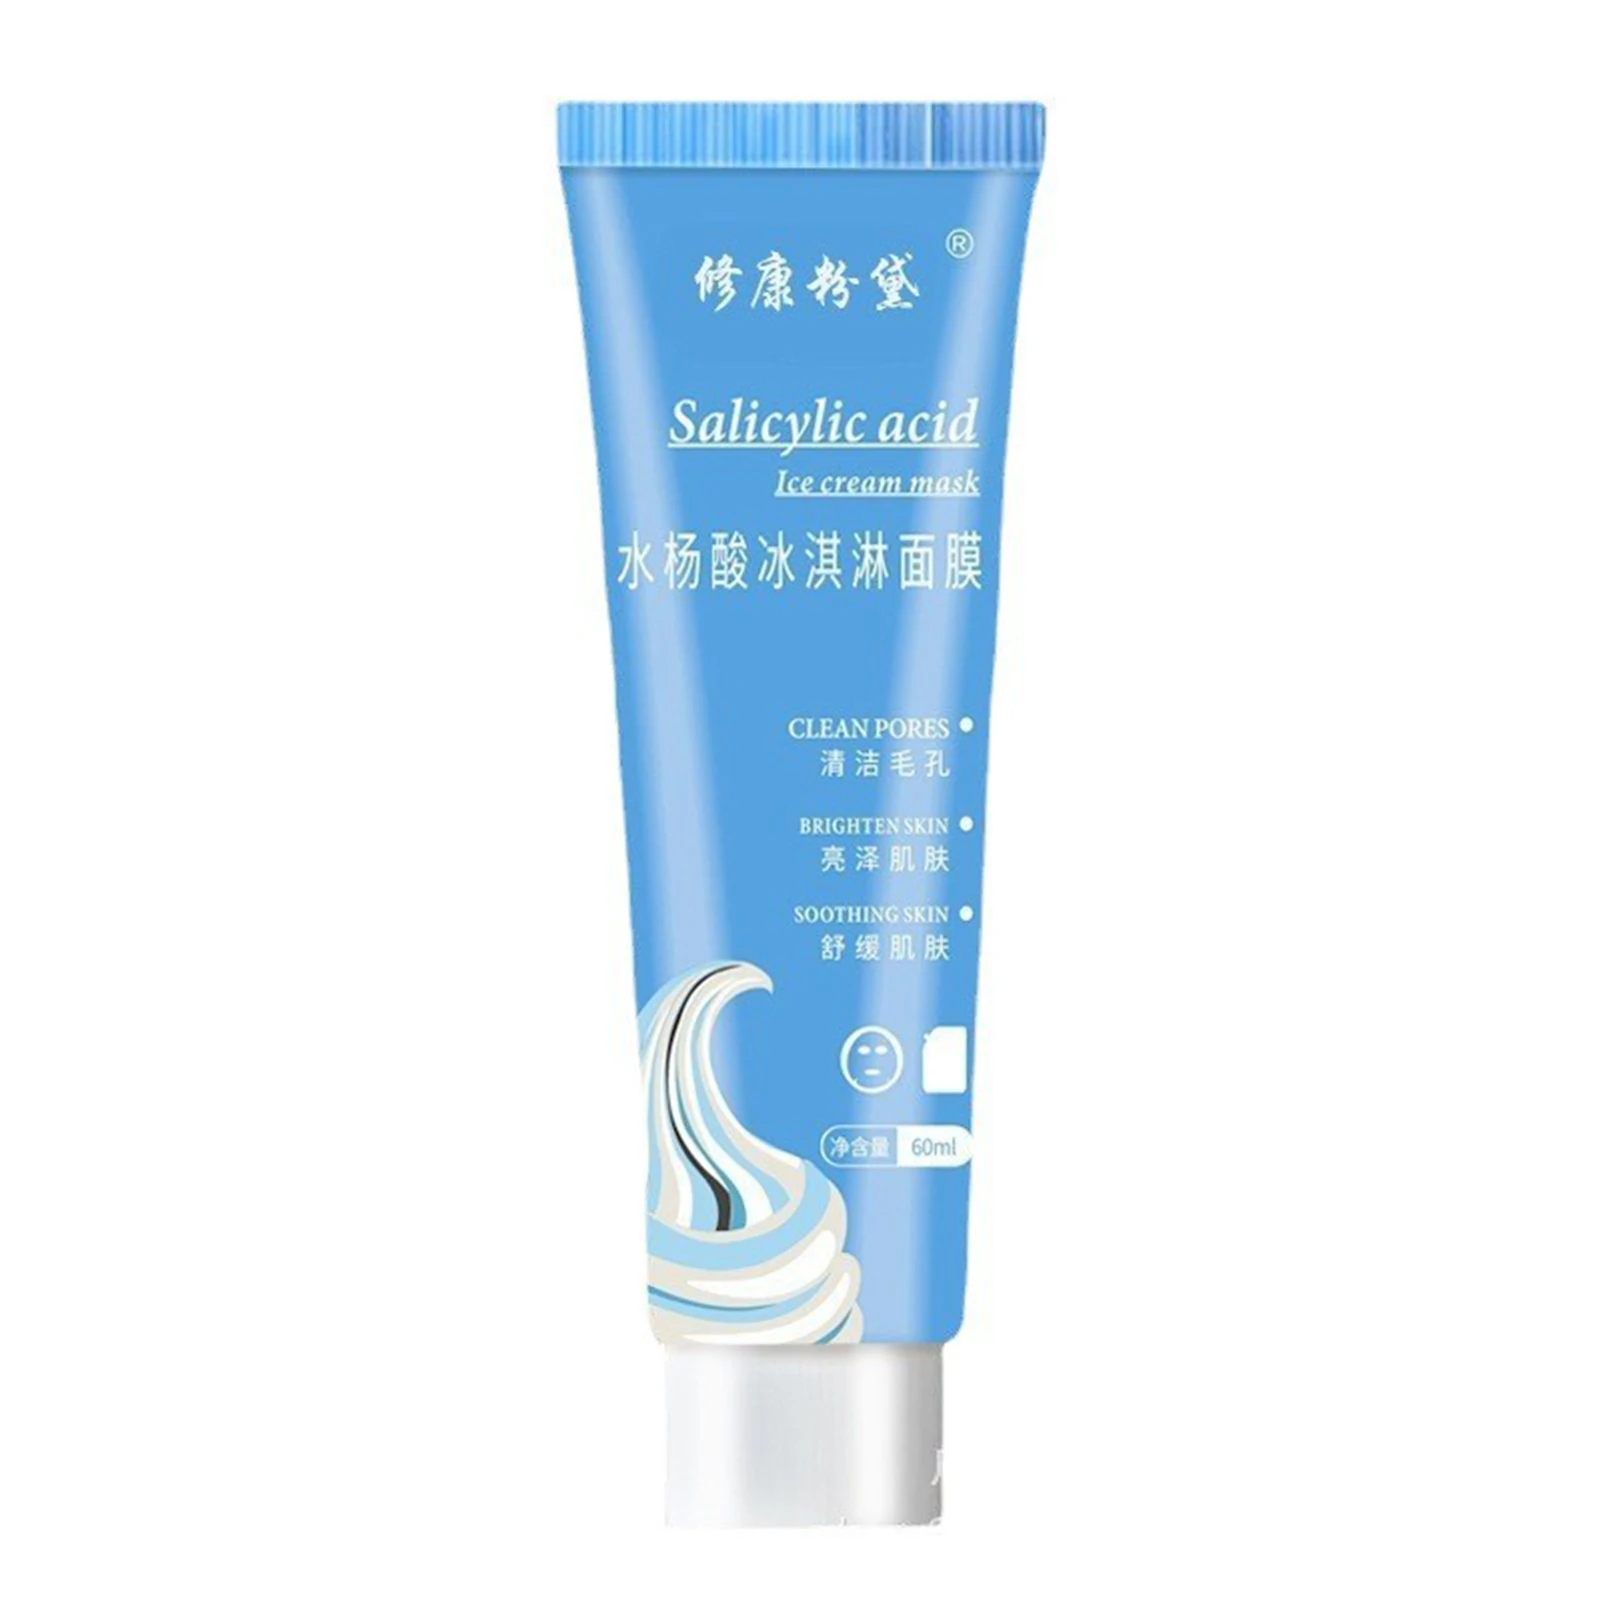 

Salicylic Acid Pore Cleaning Facial Mask Relieve Redness Swelling and Acne for Repairing and Renewing Damaged Skin